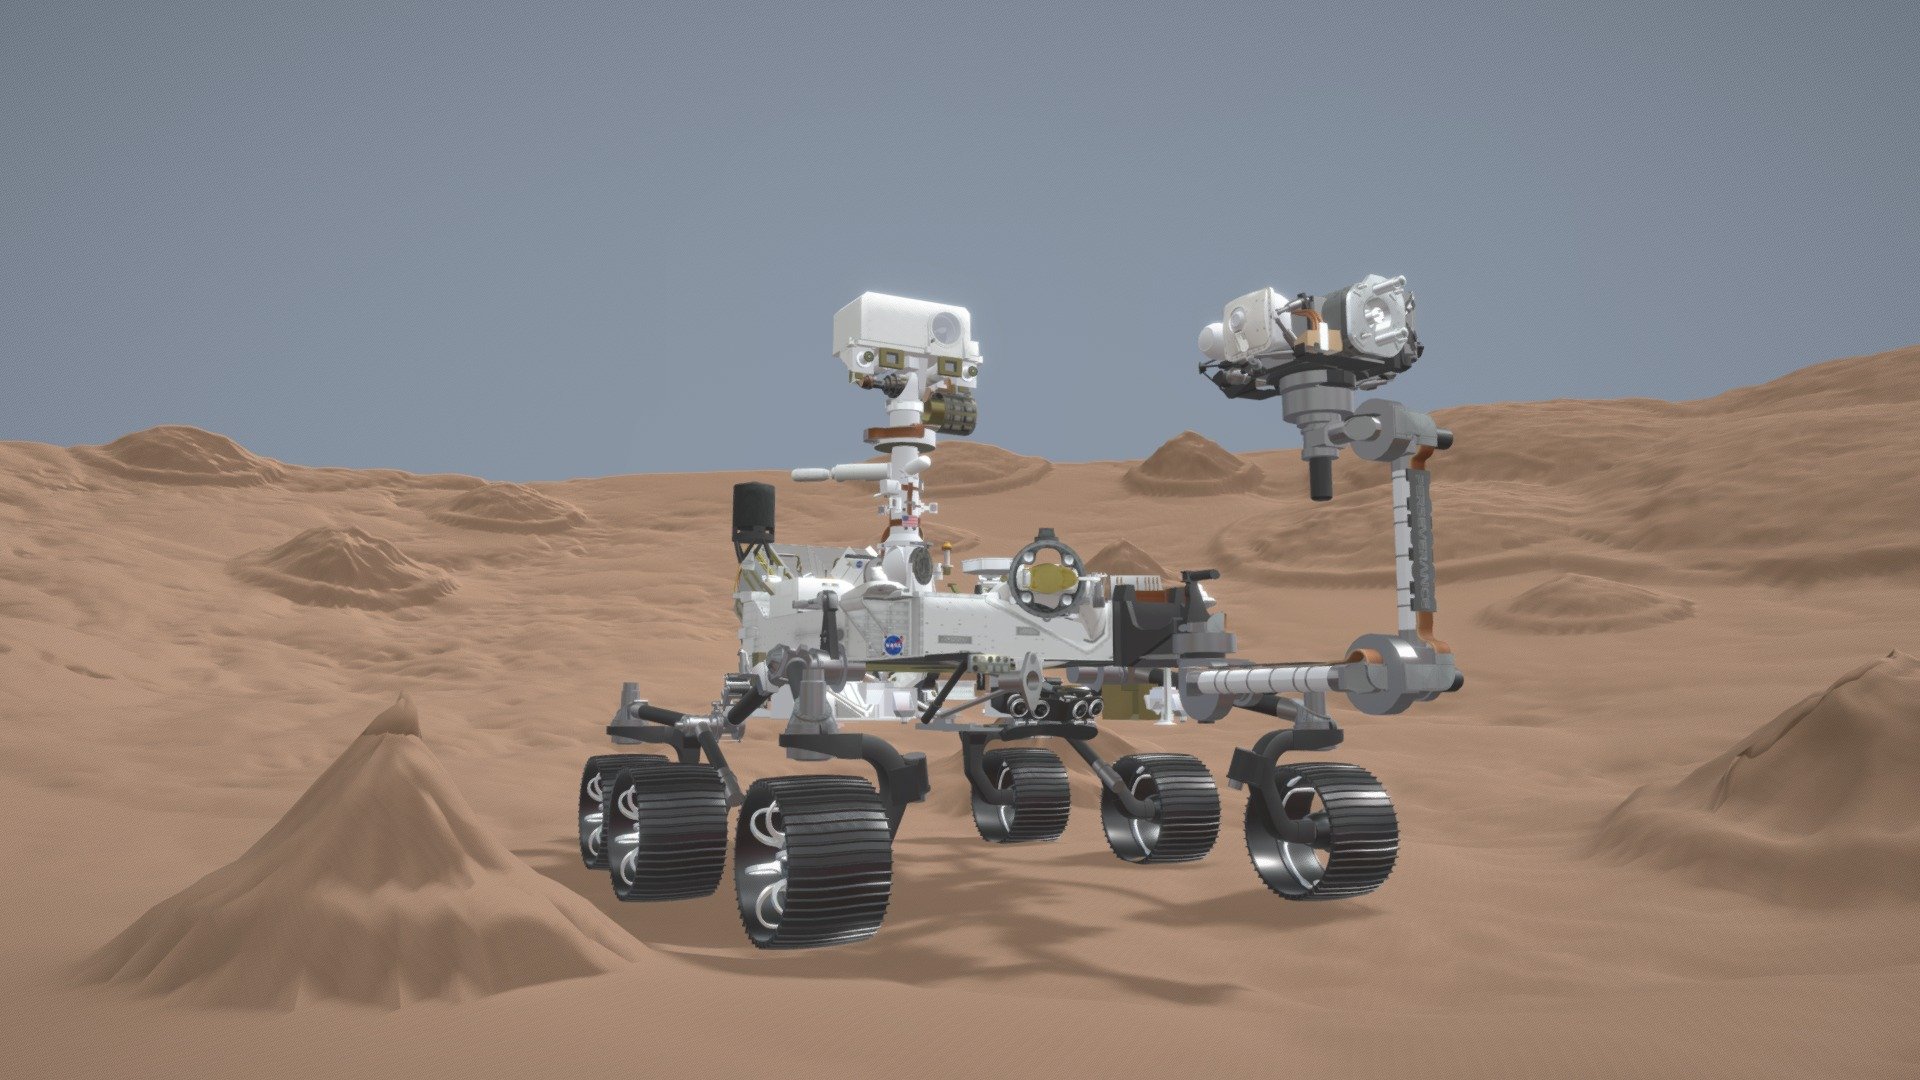 Perseverance rover on Mars